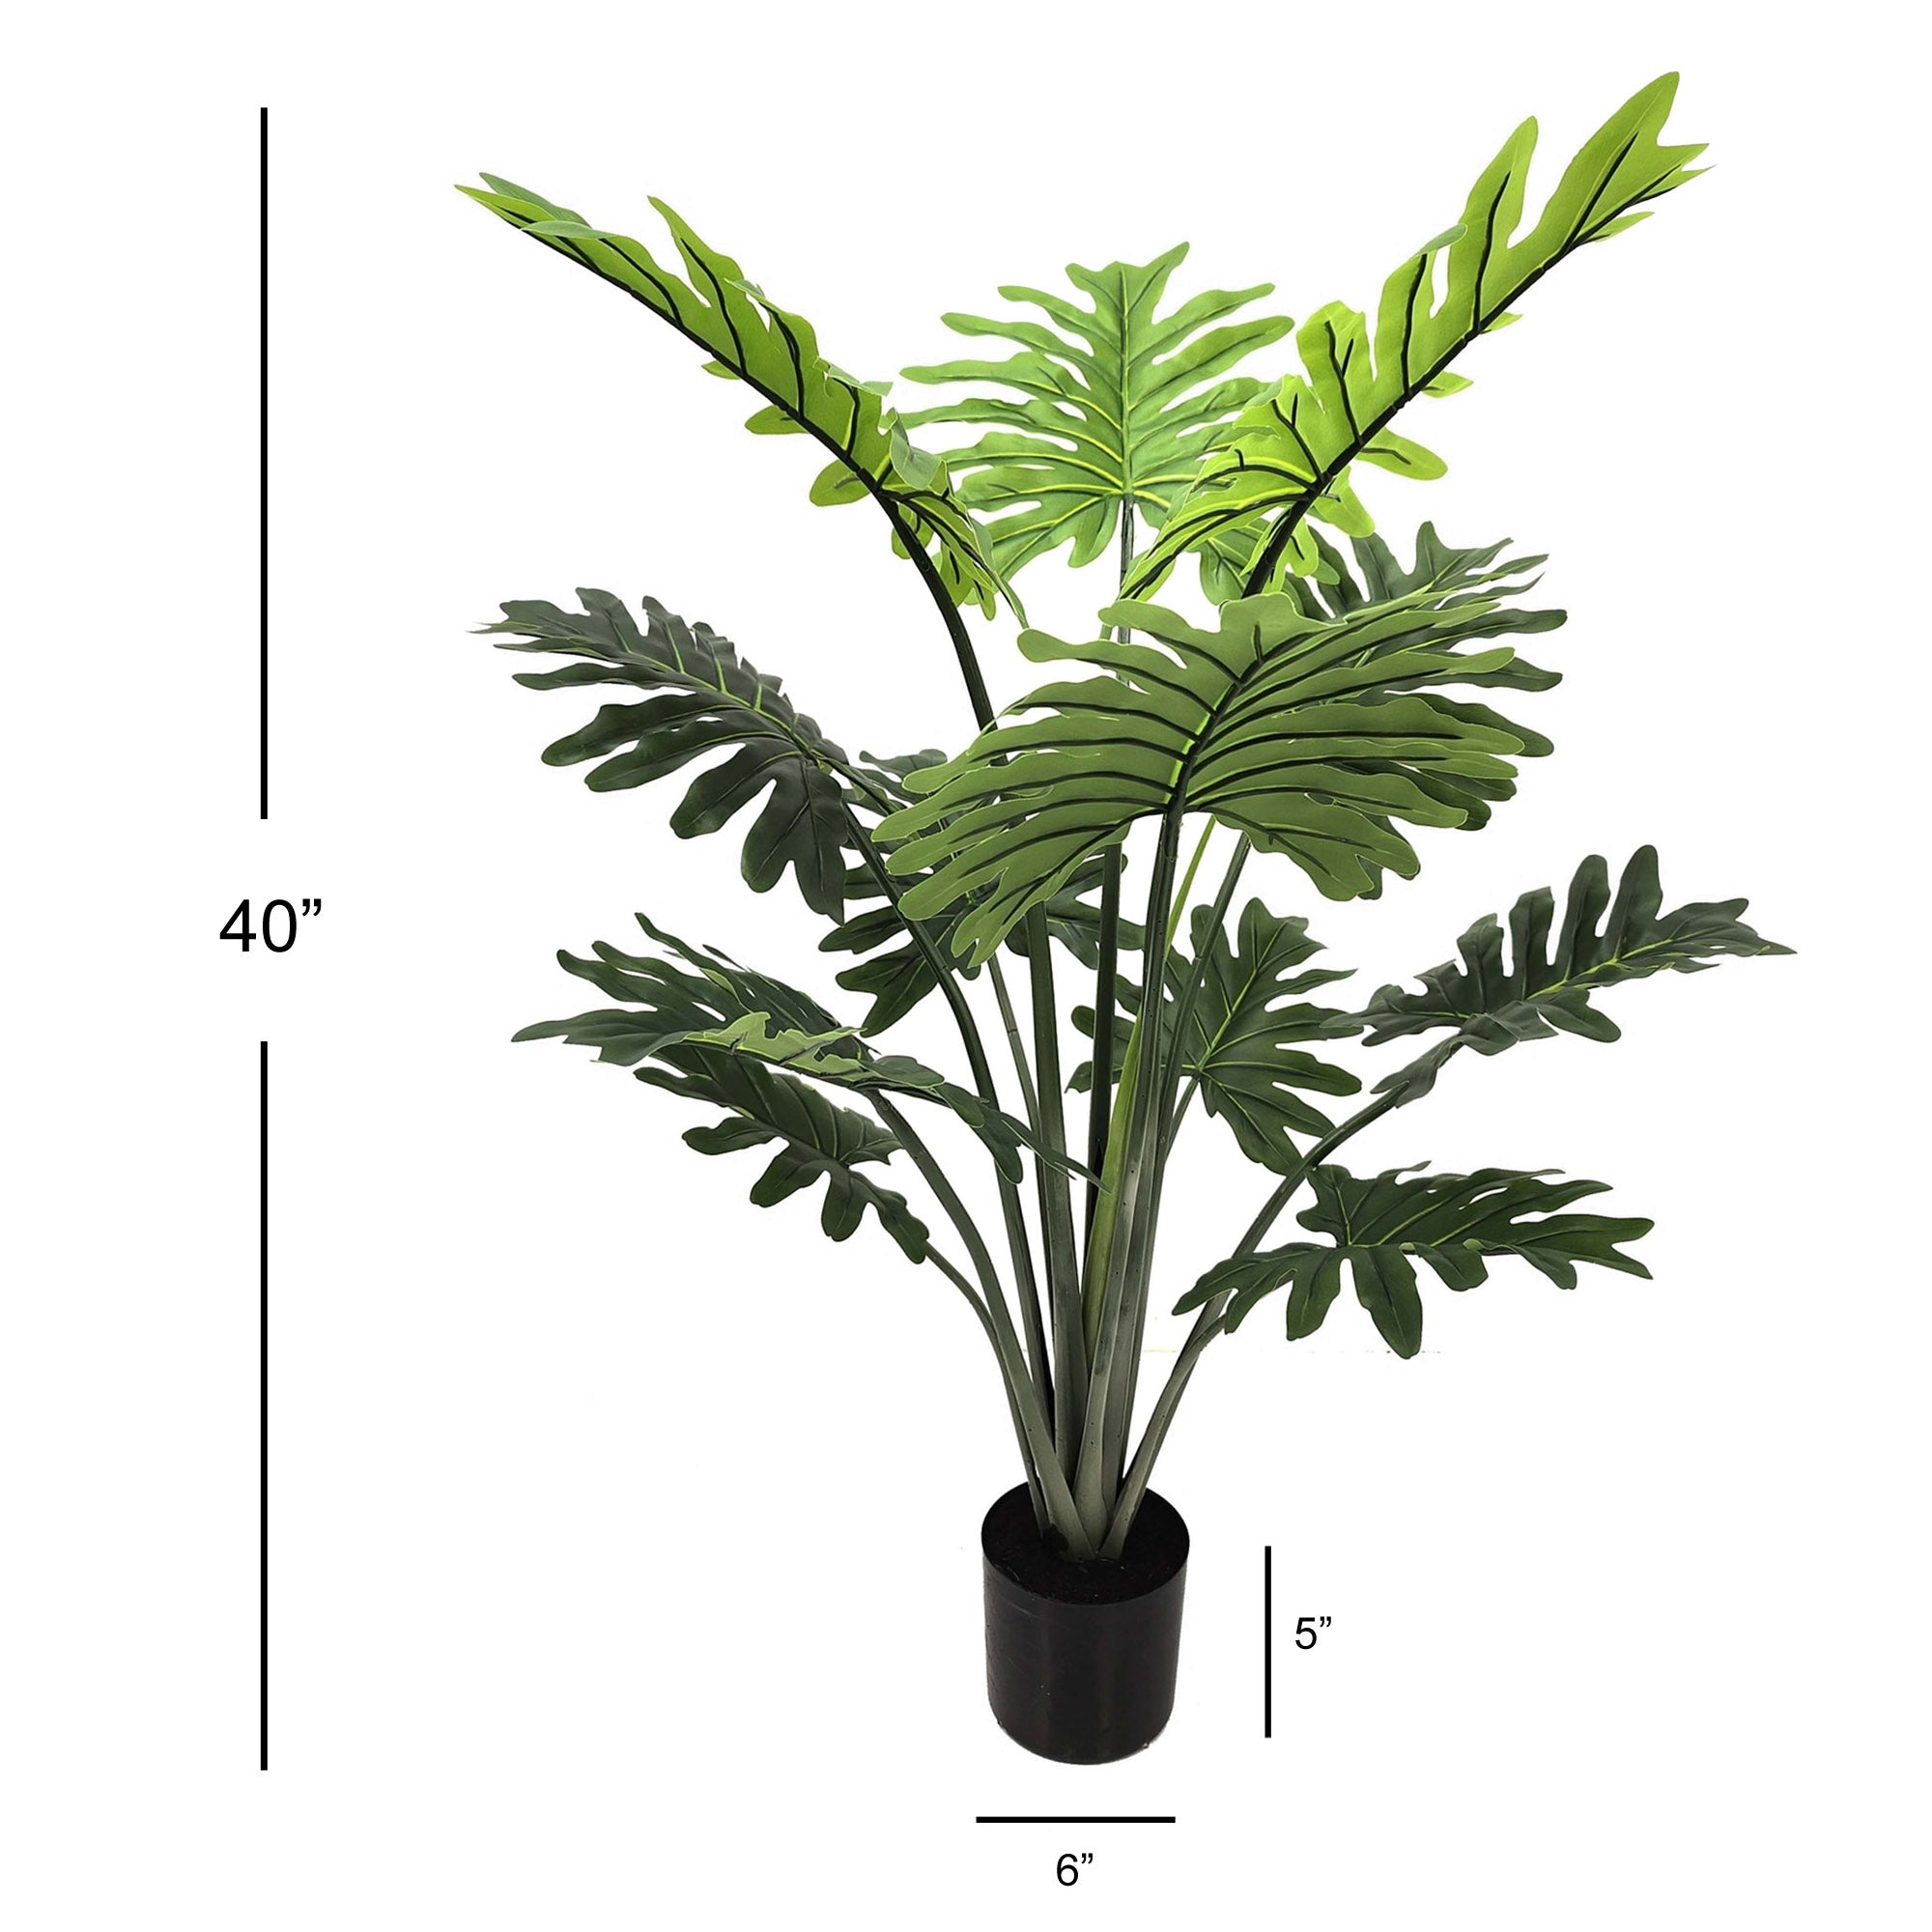 Artificial 40" Philo Selloum Plant in Pot - Lifelike Indoor Faux Greenery - Home & Office Decor - Easy Care, No Maintenance Artificial Plants ArtificialFlowers   